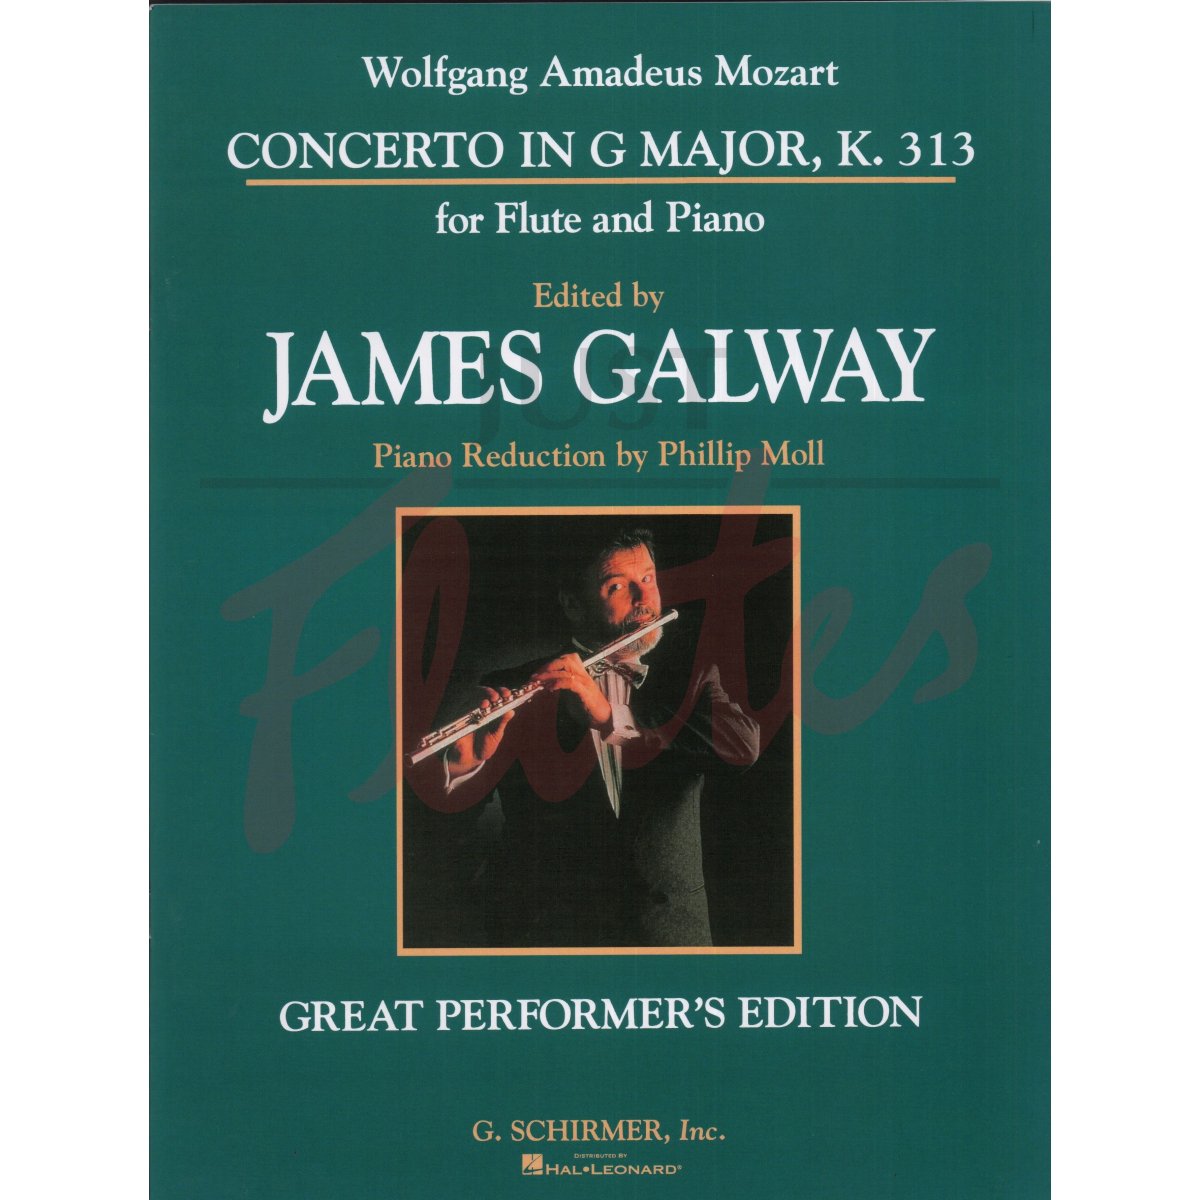 Concerto in G major for Flute and Piano